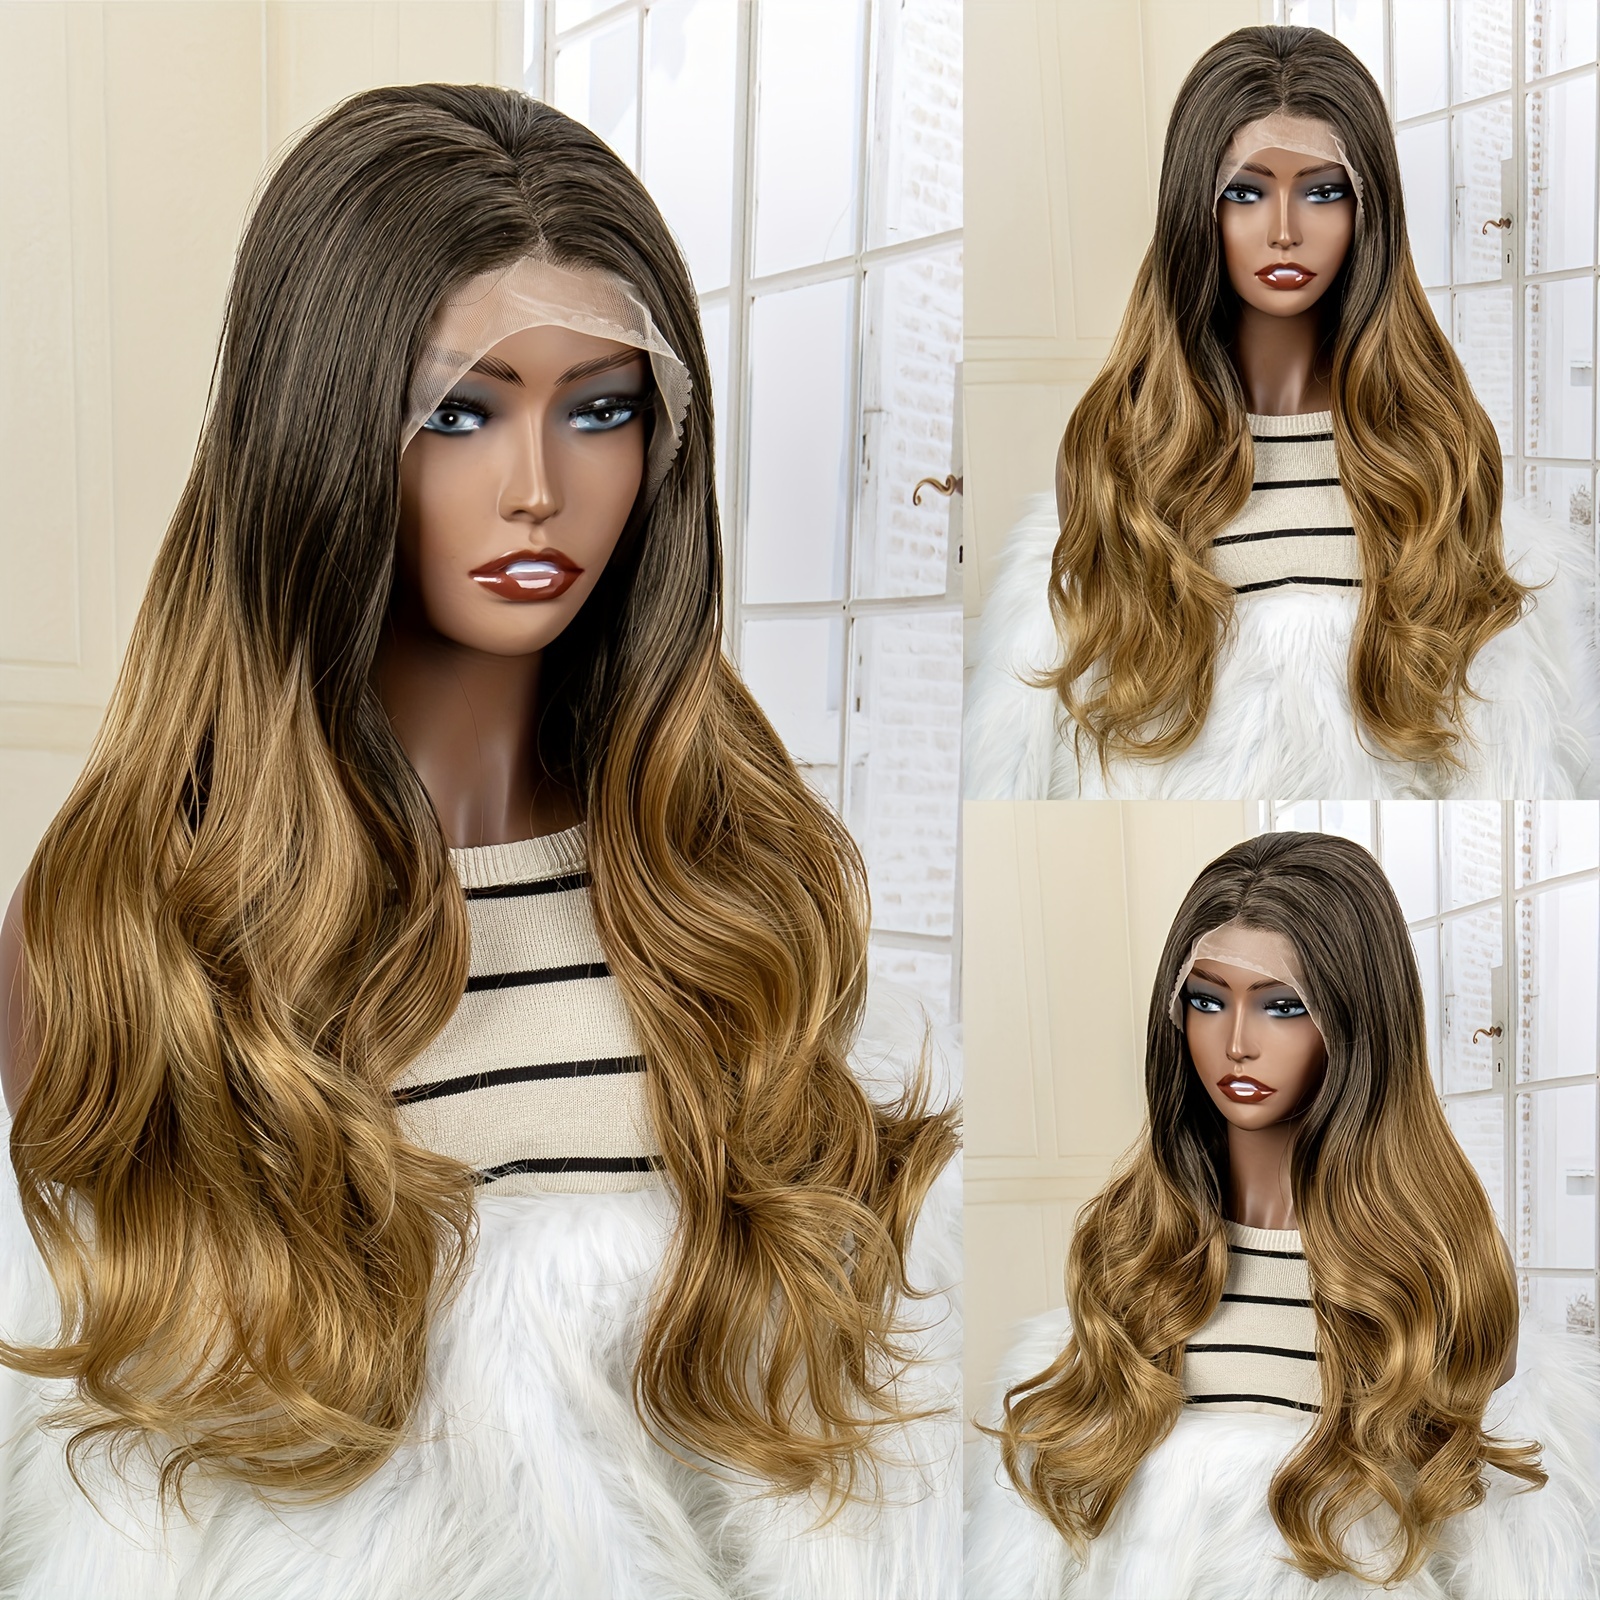 Black 13x2.5 Lace Front Braided Wigs Box Braids Synthetic Wig For